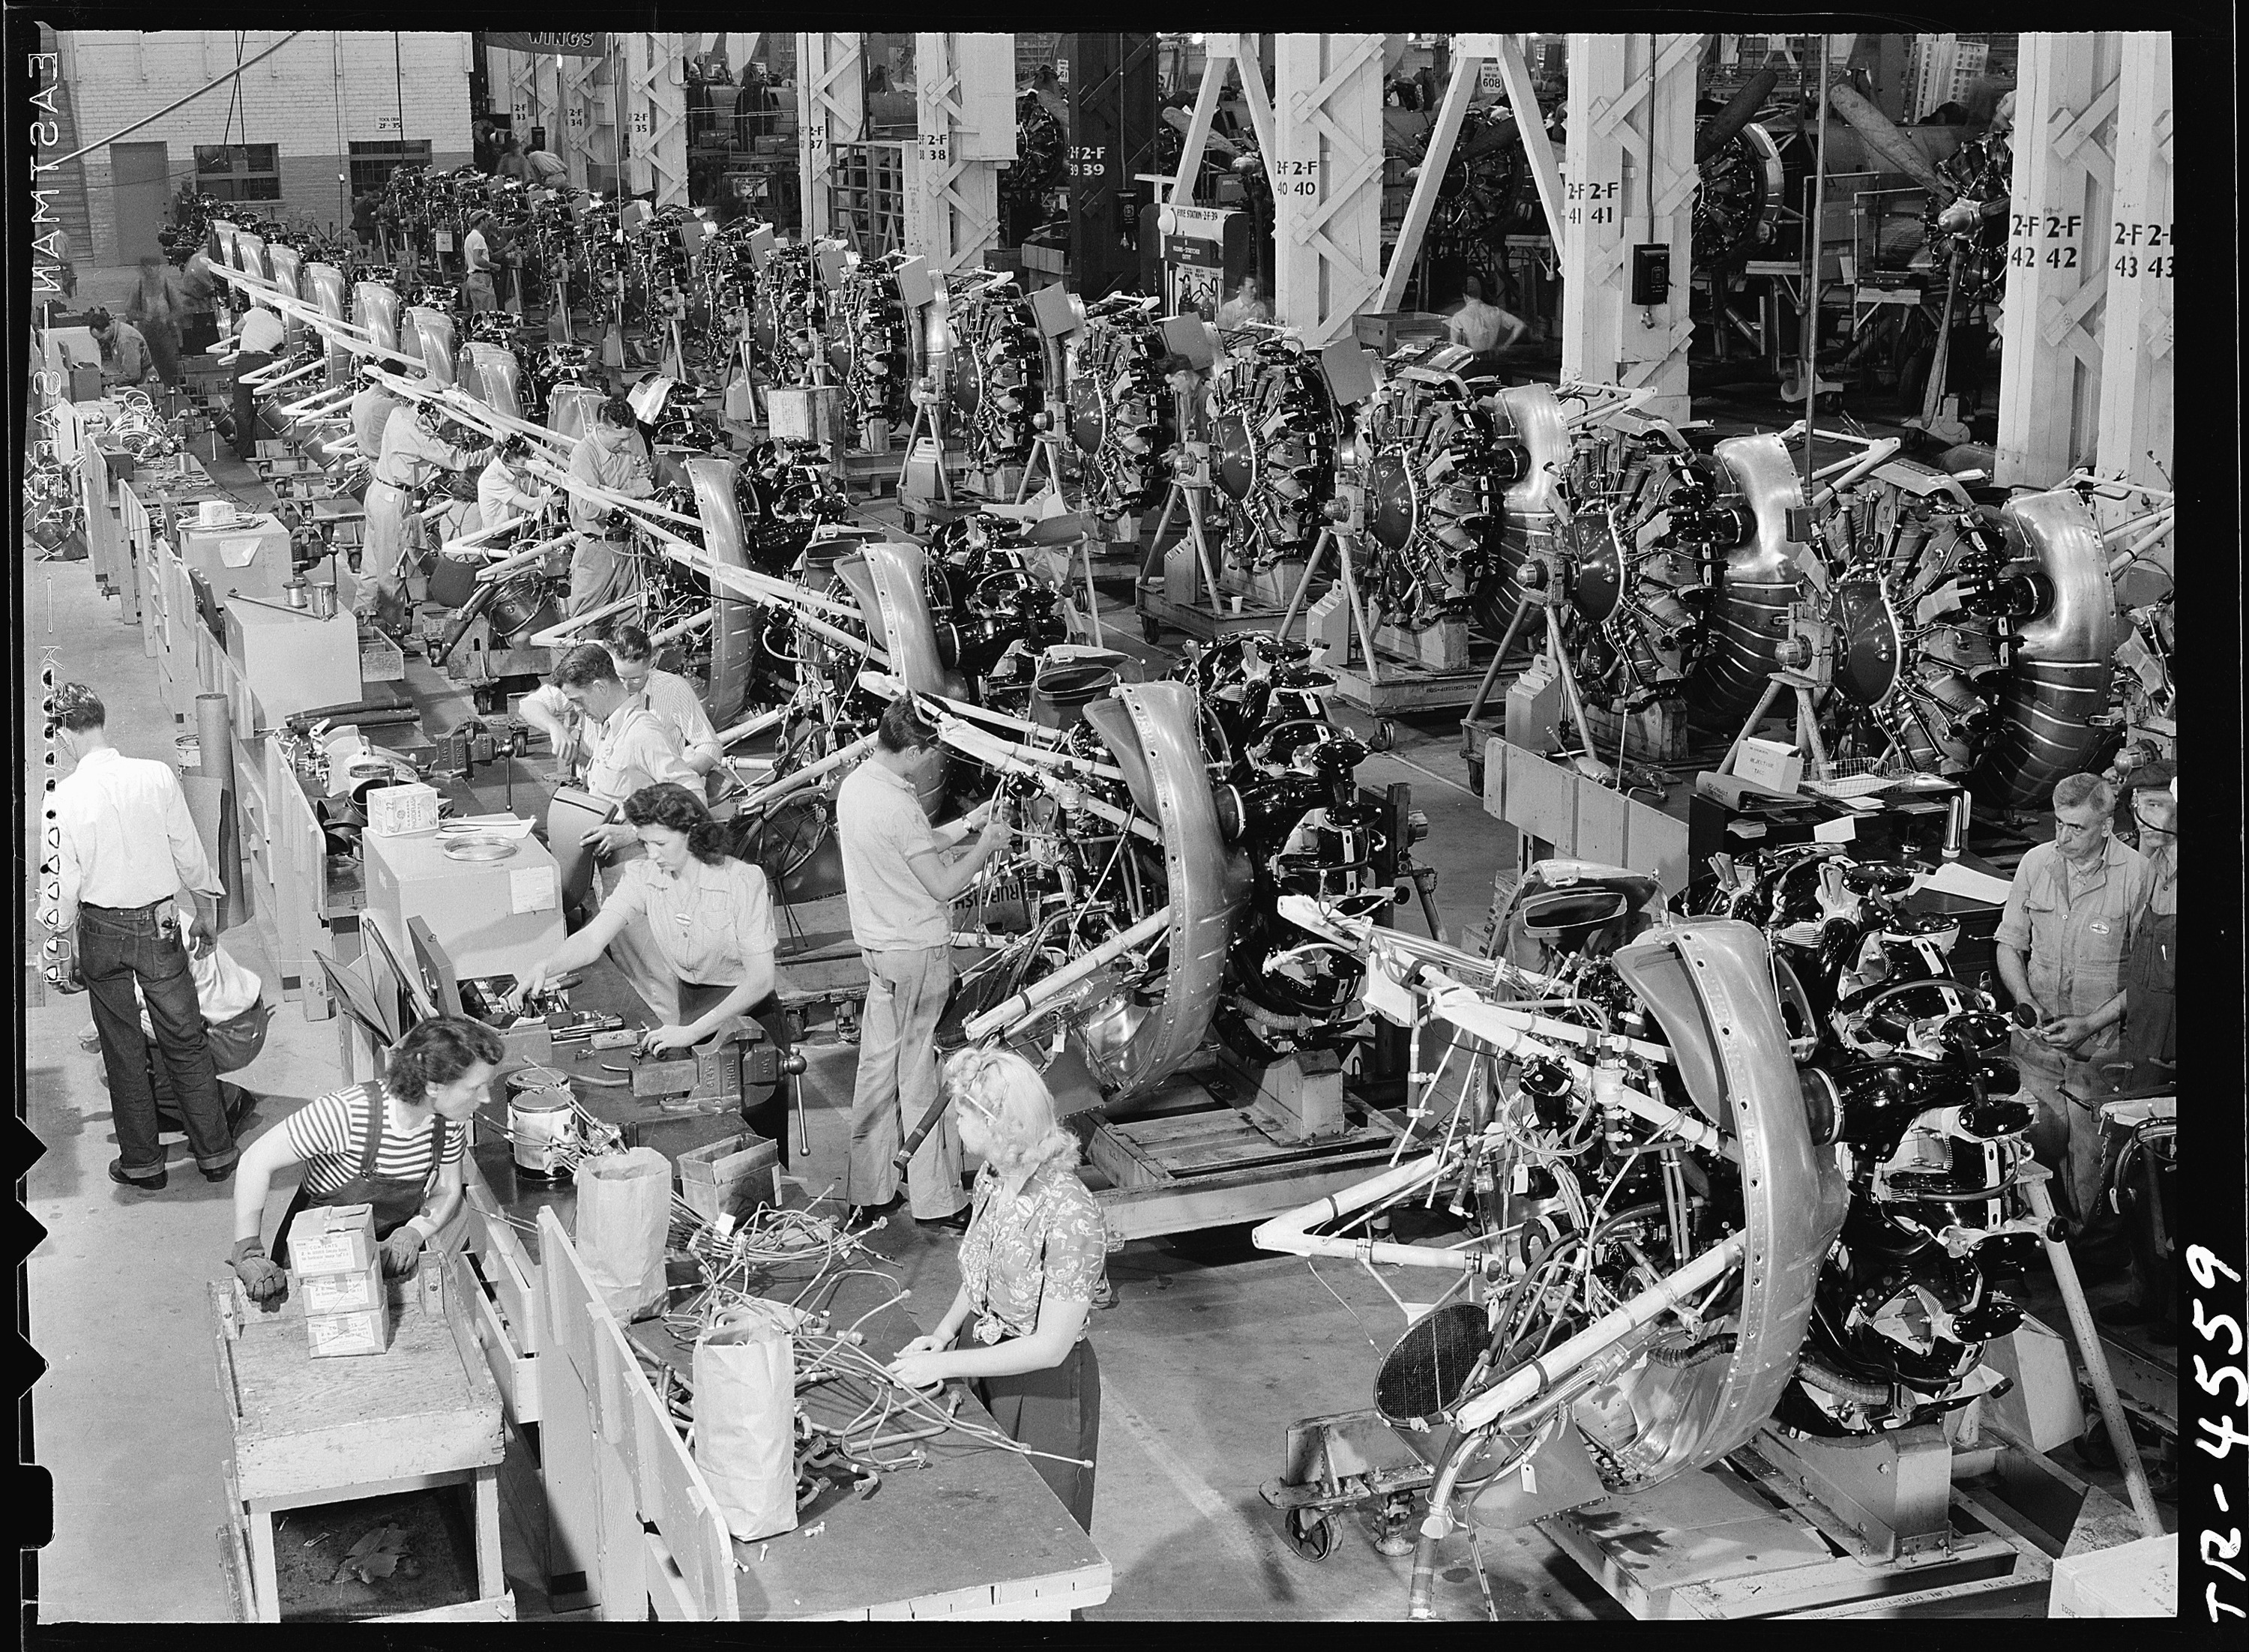 Inside the Douglas aircraft plant at El Segundo, Cal. Row on row the powerful engines that will drive SBD's on... - NARA - 520741